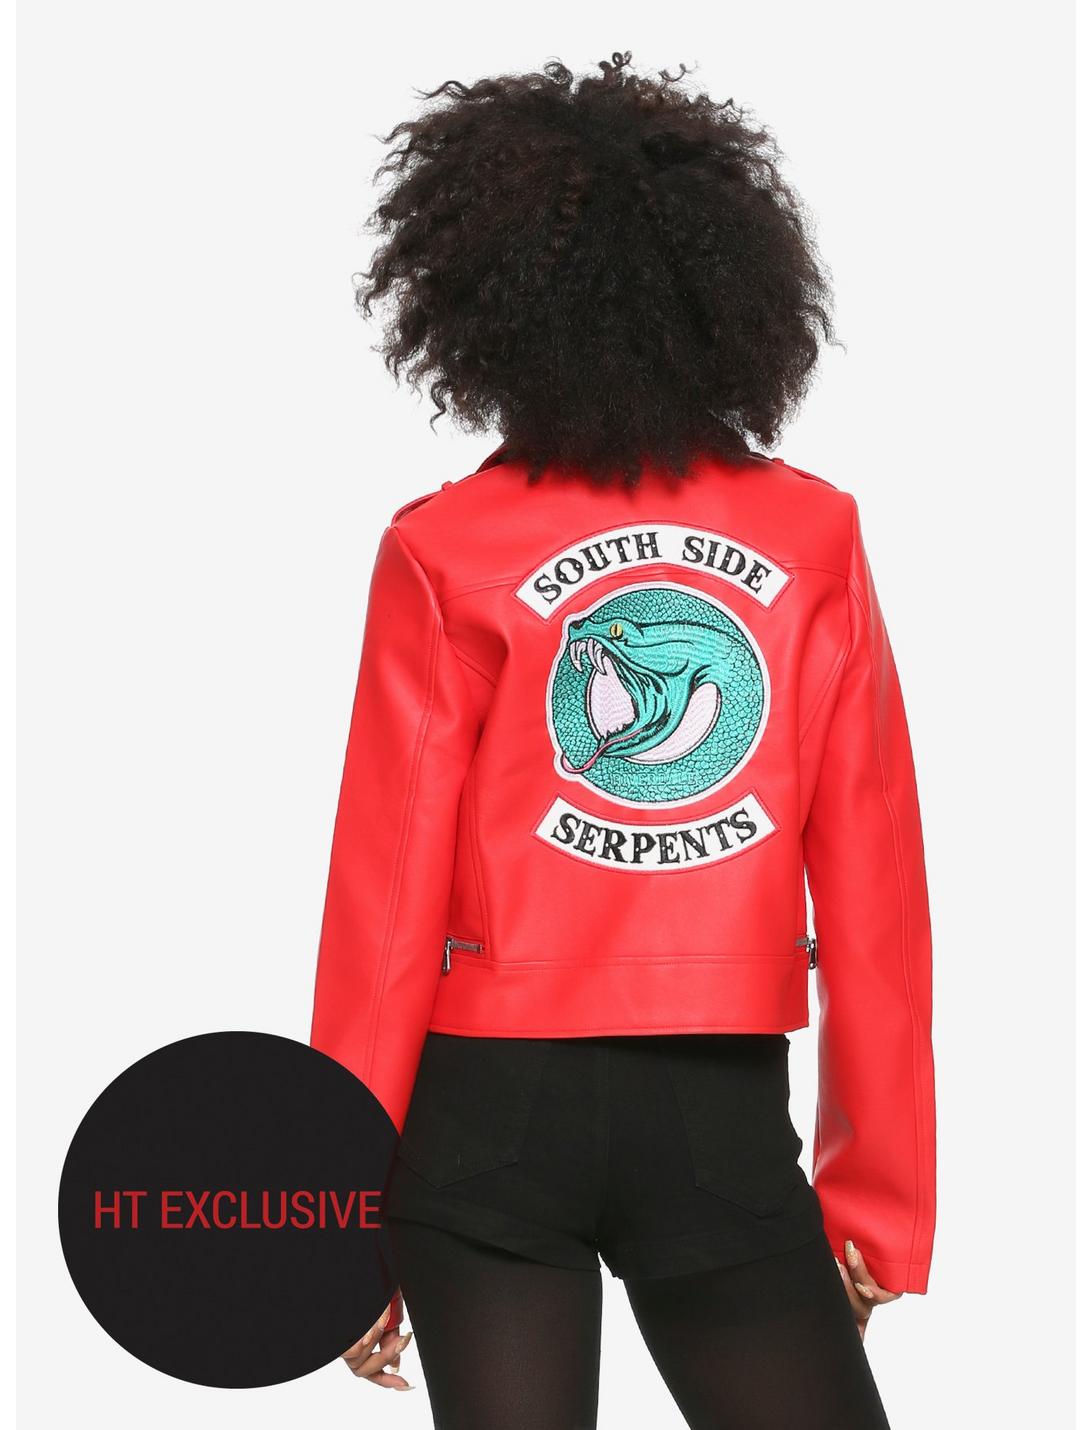 Riverdale Cheryl Southside Serpents Faux Leather Red Girls Jacket Hot Topic Exclusive, RED, hi-res